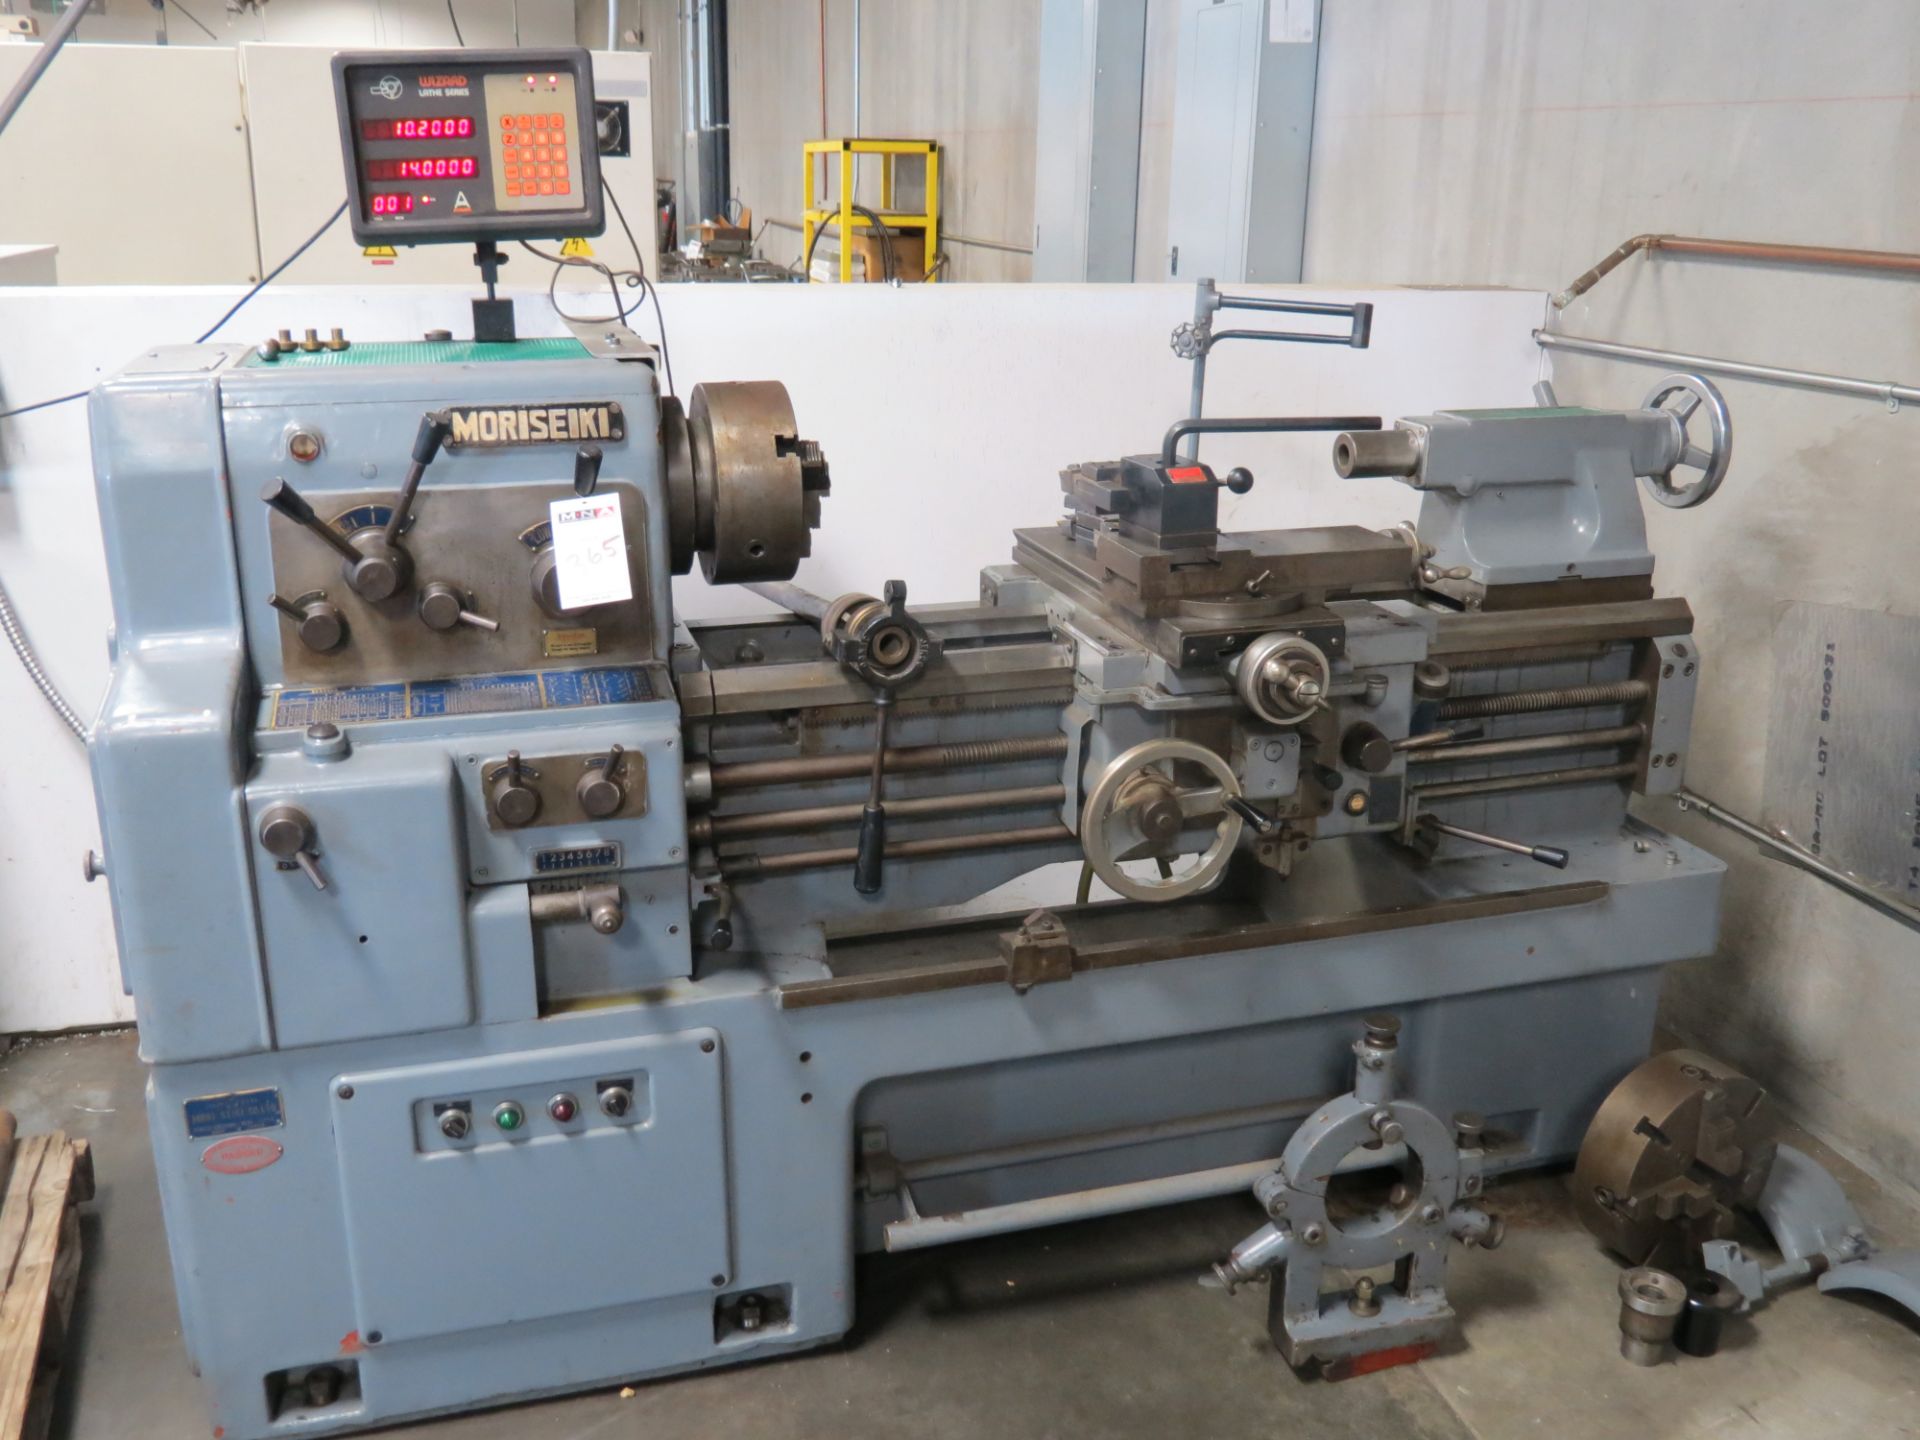 17" x 36" Mori Seiki MS-850G Gap Bed Engine Lathe, DRO, 3- and 4-jaw chucks, steady rest and tool - Image 2 of 5